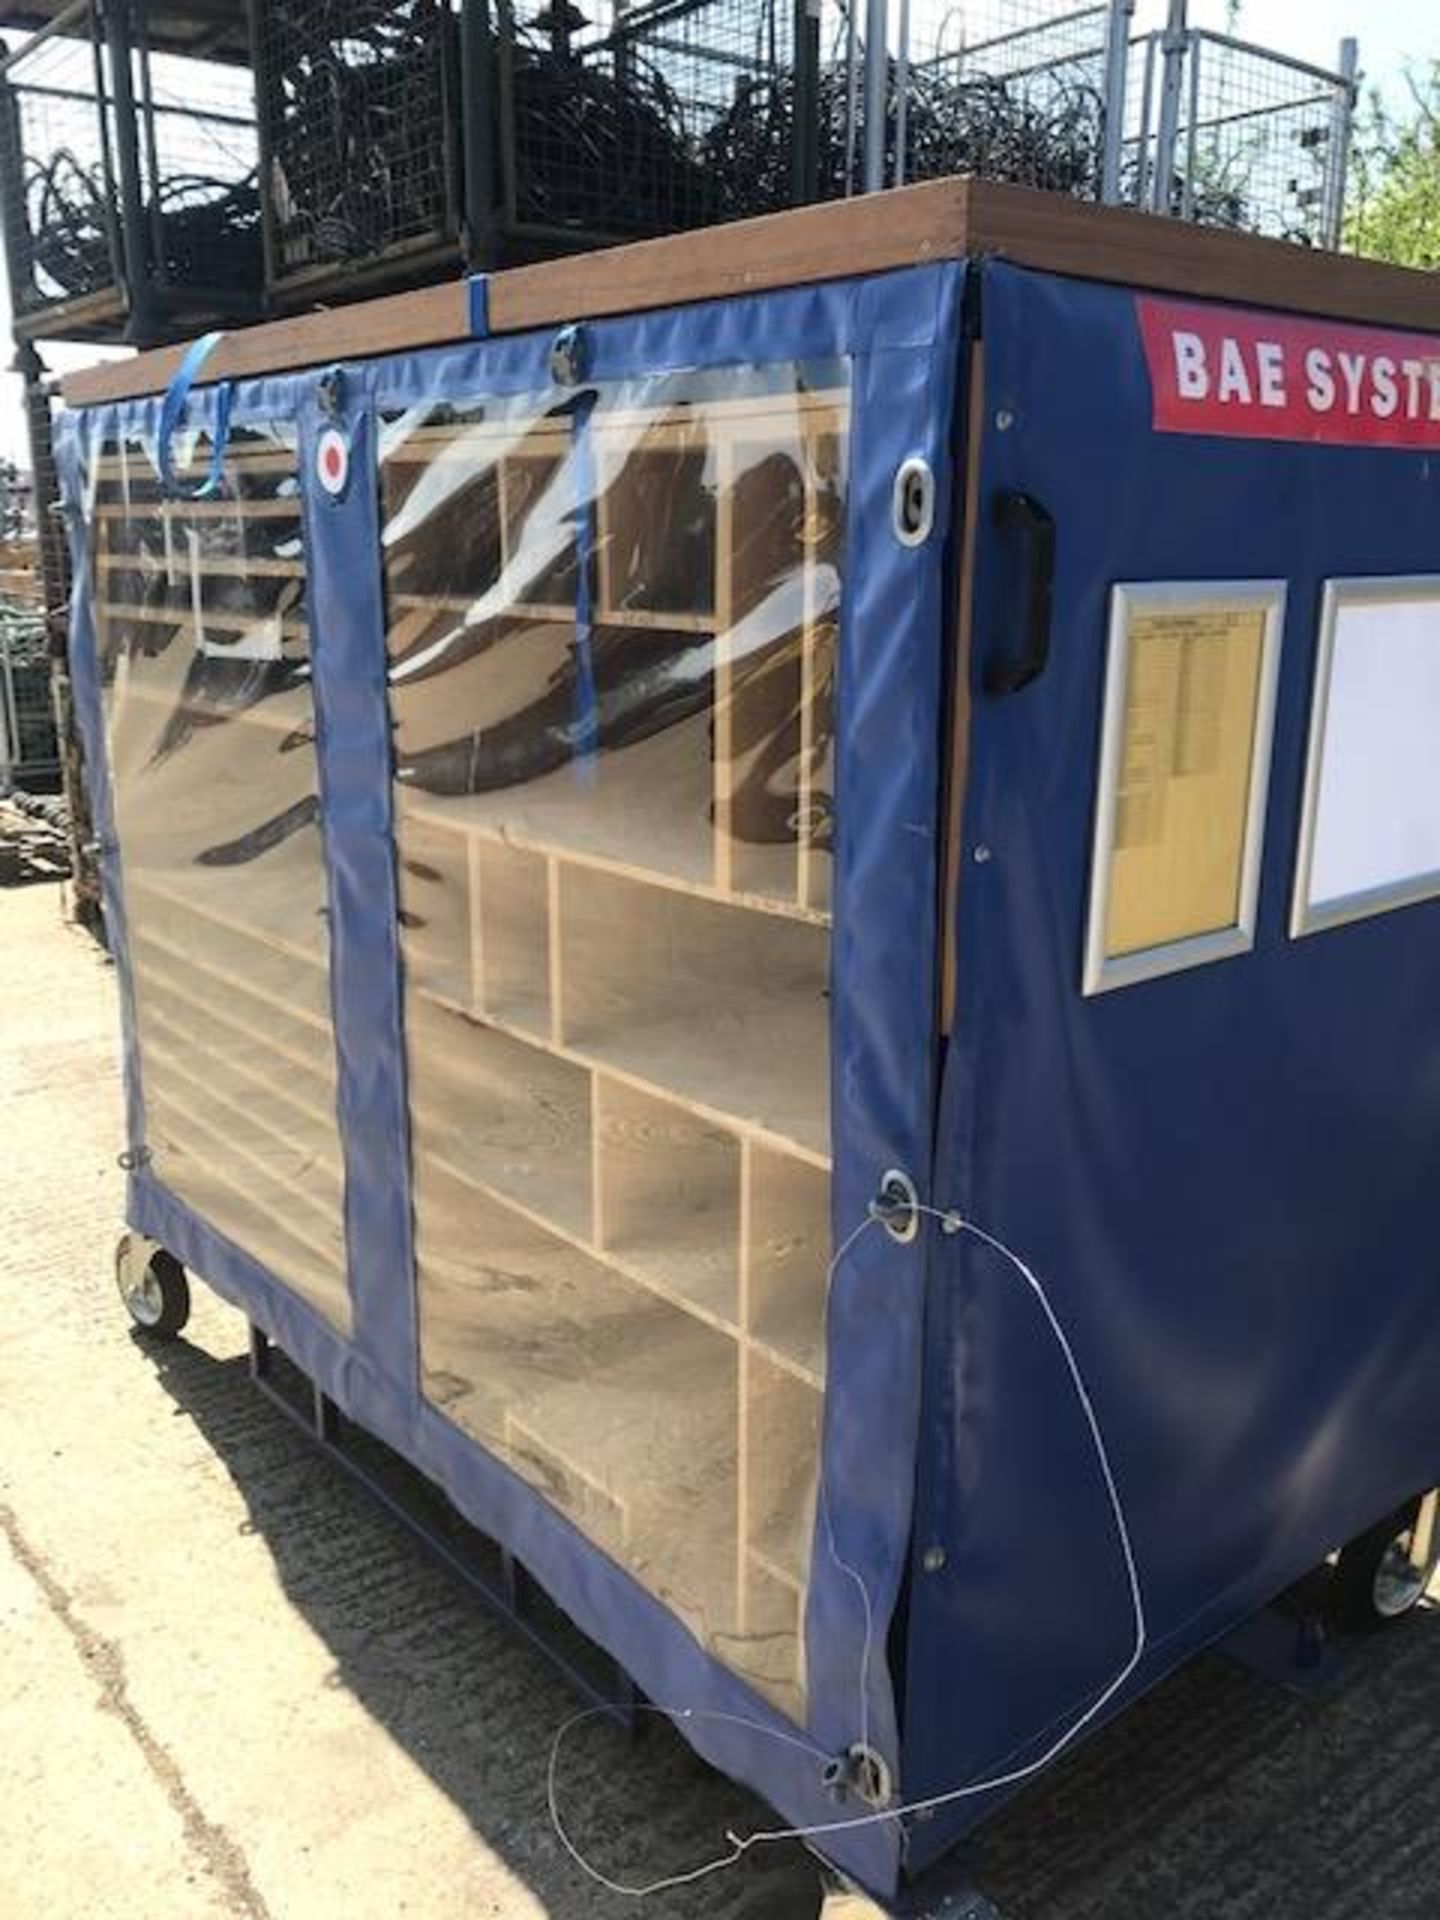 Quantity 2 x BAE Systems MOD Mobile Tool Trolley with draw bar. - Image 3 of 4